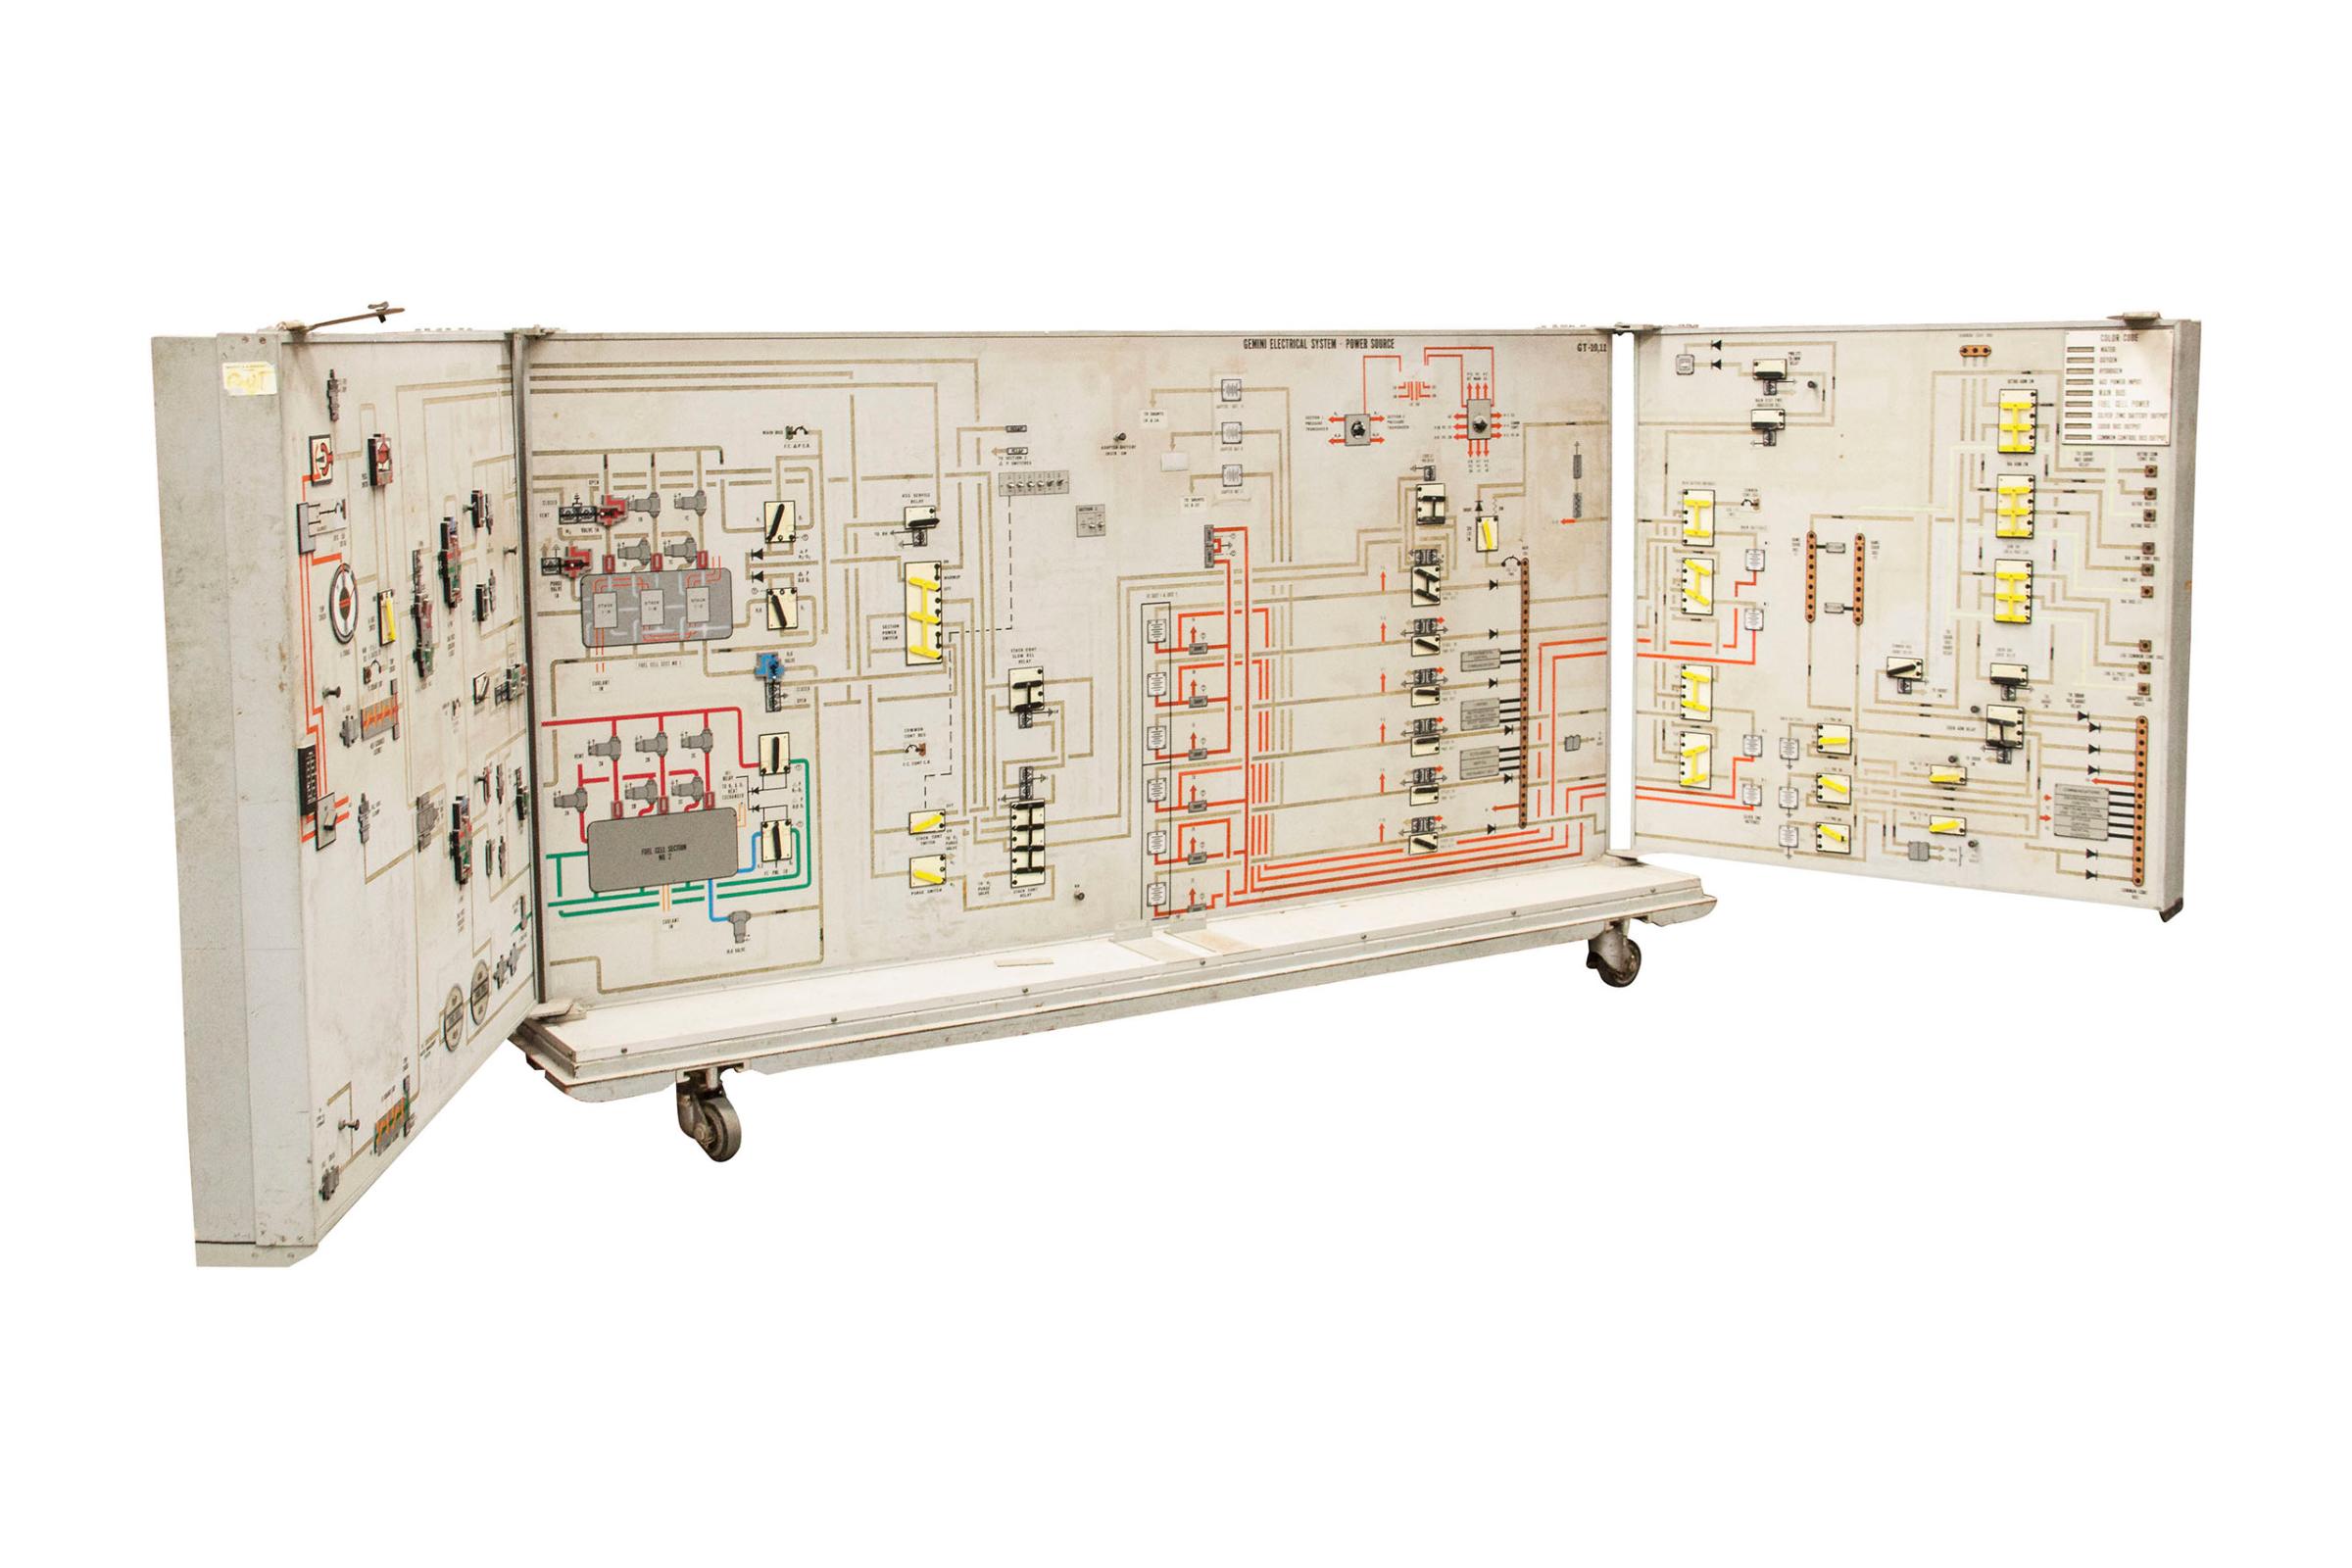 The Gemini 133P trainer assembly was used to train the Gemini astronauts at the Manned Spacecraft Center in Houston. Essentially a duplicate of the display panels and instruments found inside the Gemini spacecraft, the system was used to learn the Attitude control and Maneuver Electronics System (ACME), the Orbit Attitude Maneuvering System (OAMS), and the Landing & Post Landing Procedures, amongst many other skills.